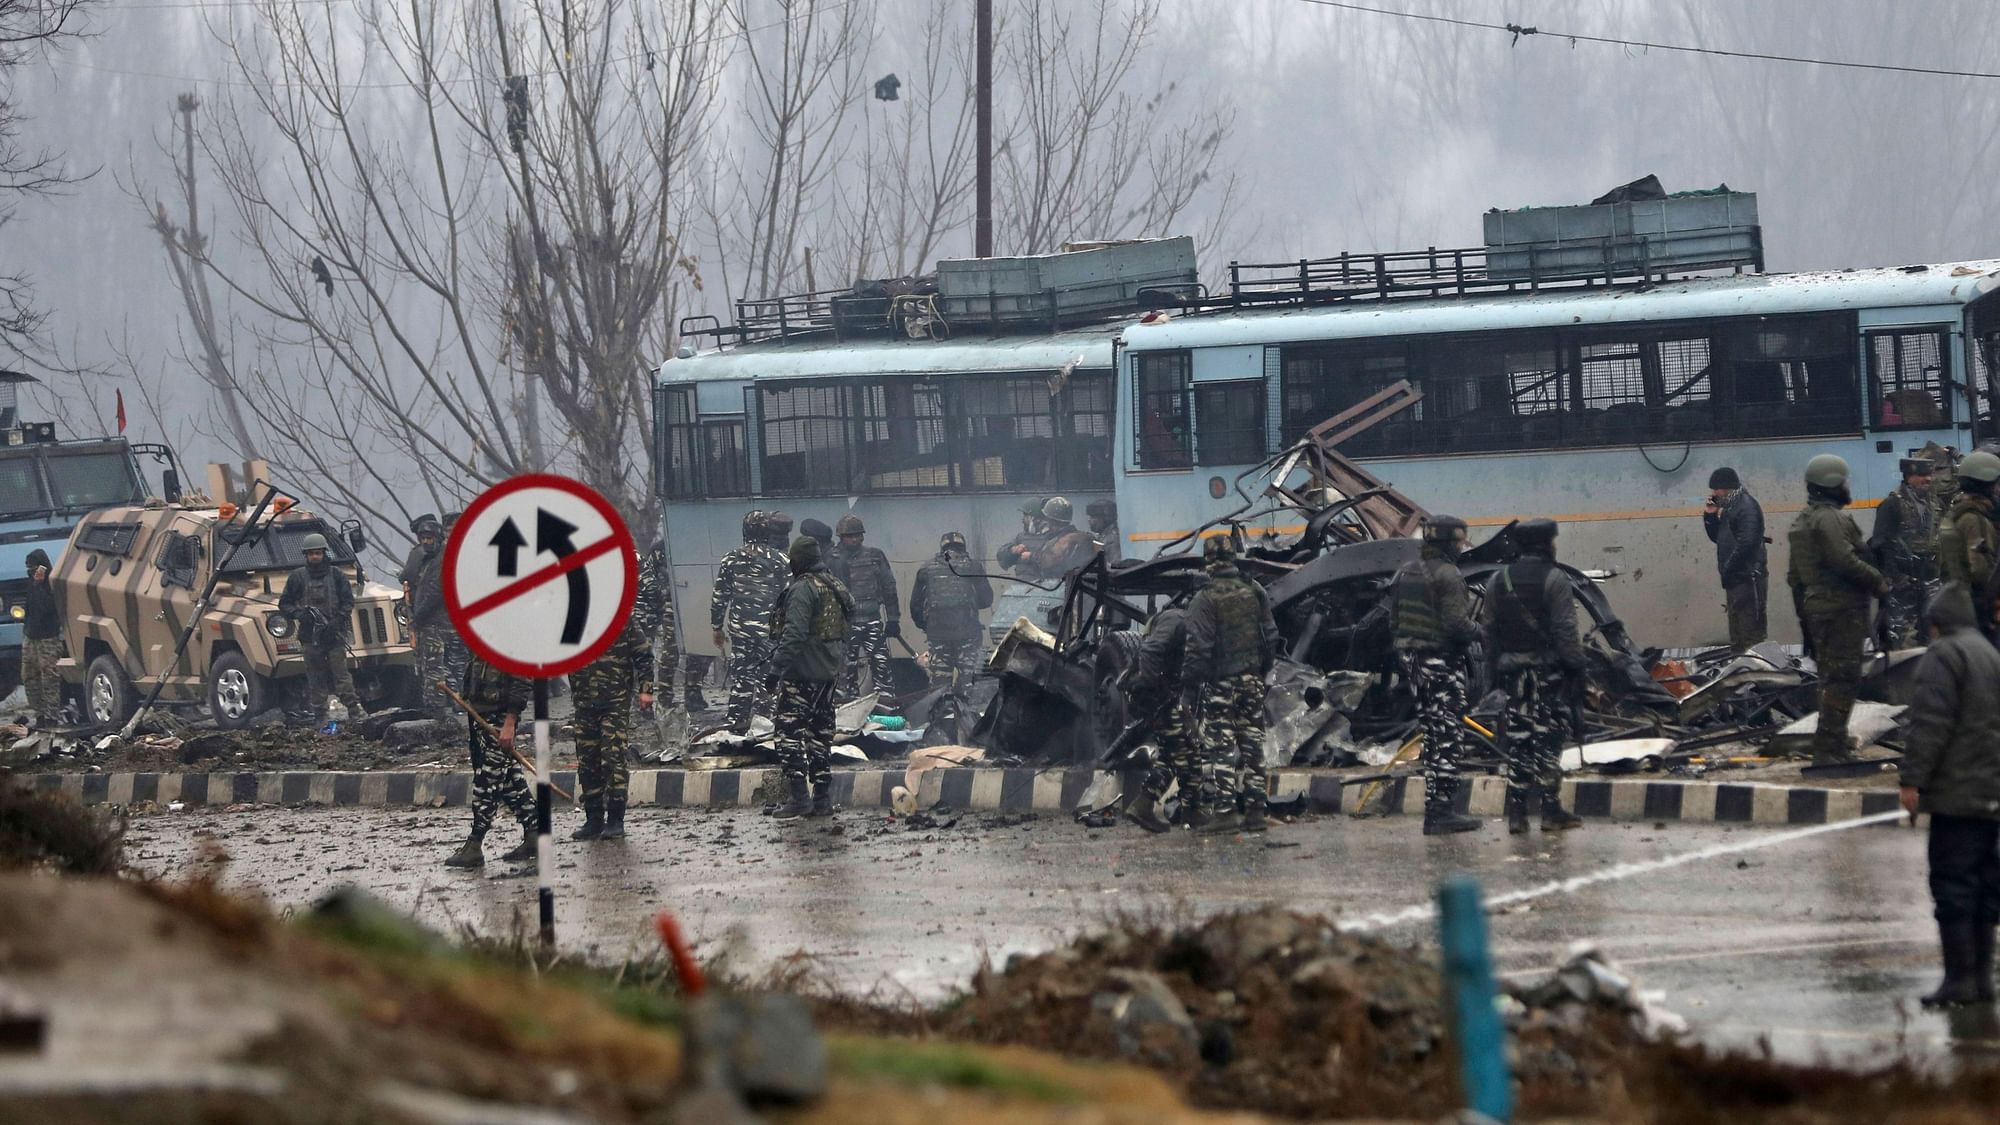 Security personnel carry out the rescue and relief works at the site of suicide bomb attack at Lathepora Awantipora in Pulwama district of south Kashmir, Thursday, 14 February. At least 40 CRPF jawans were killed and dozens other injured when a CRPF convoy was attacked.